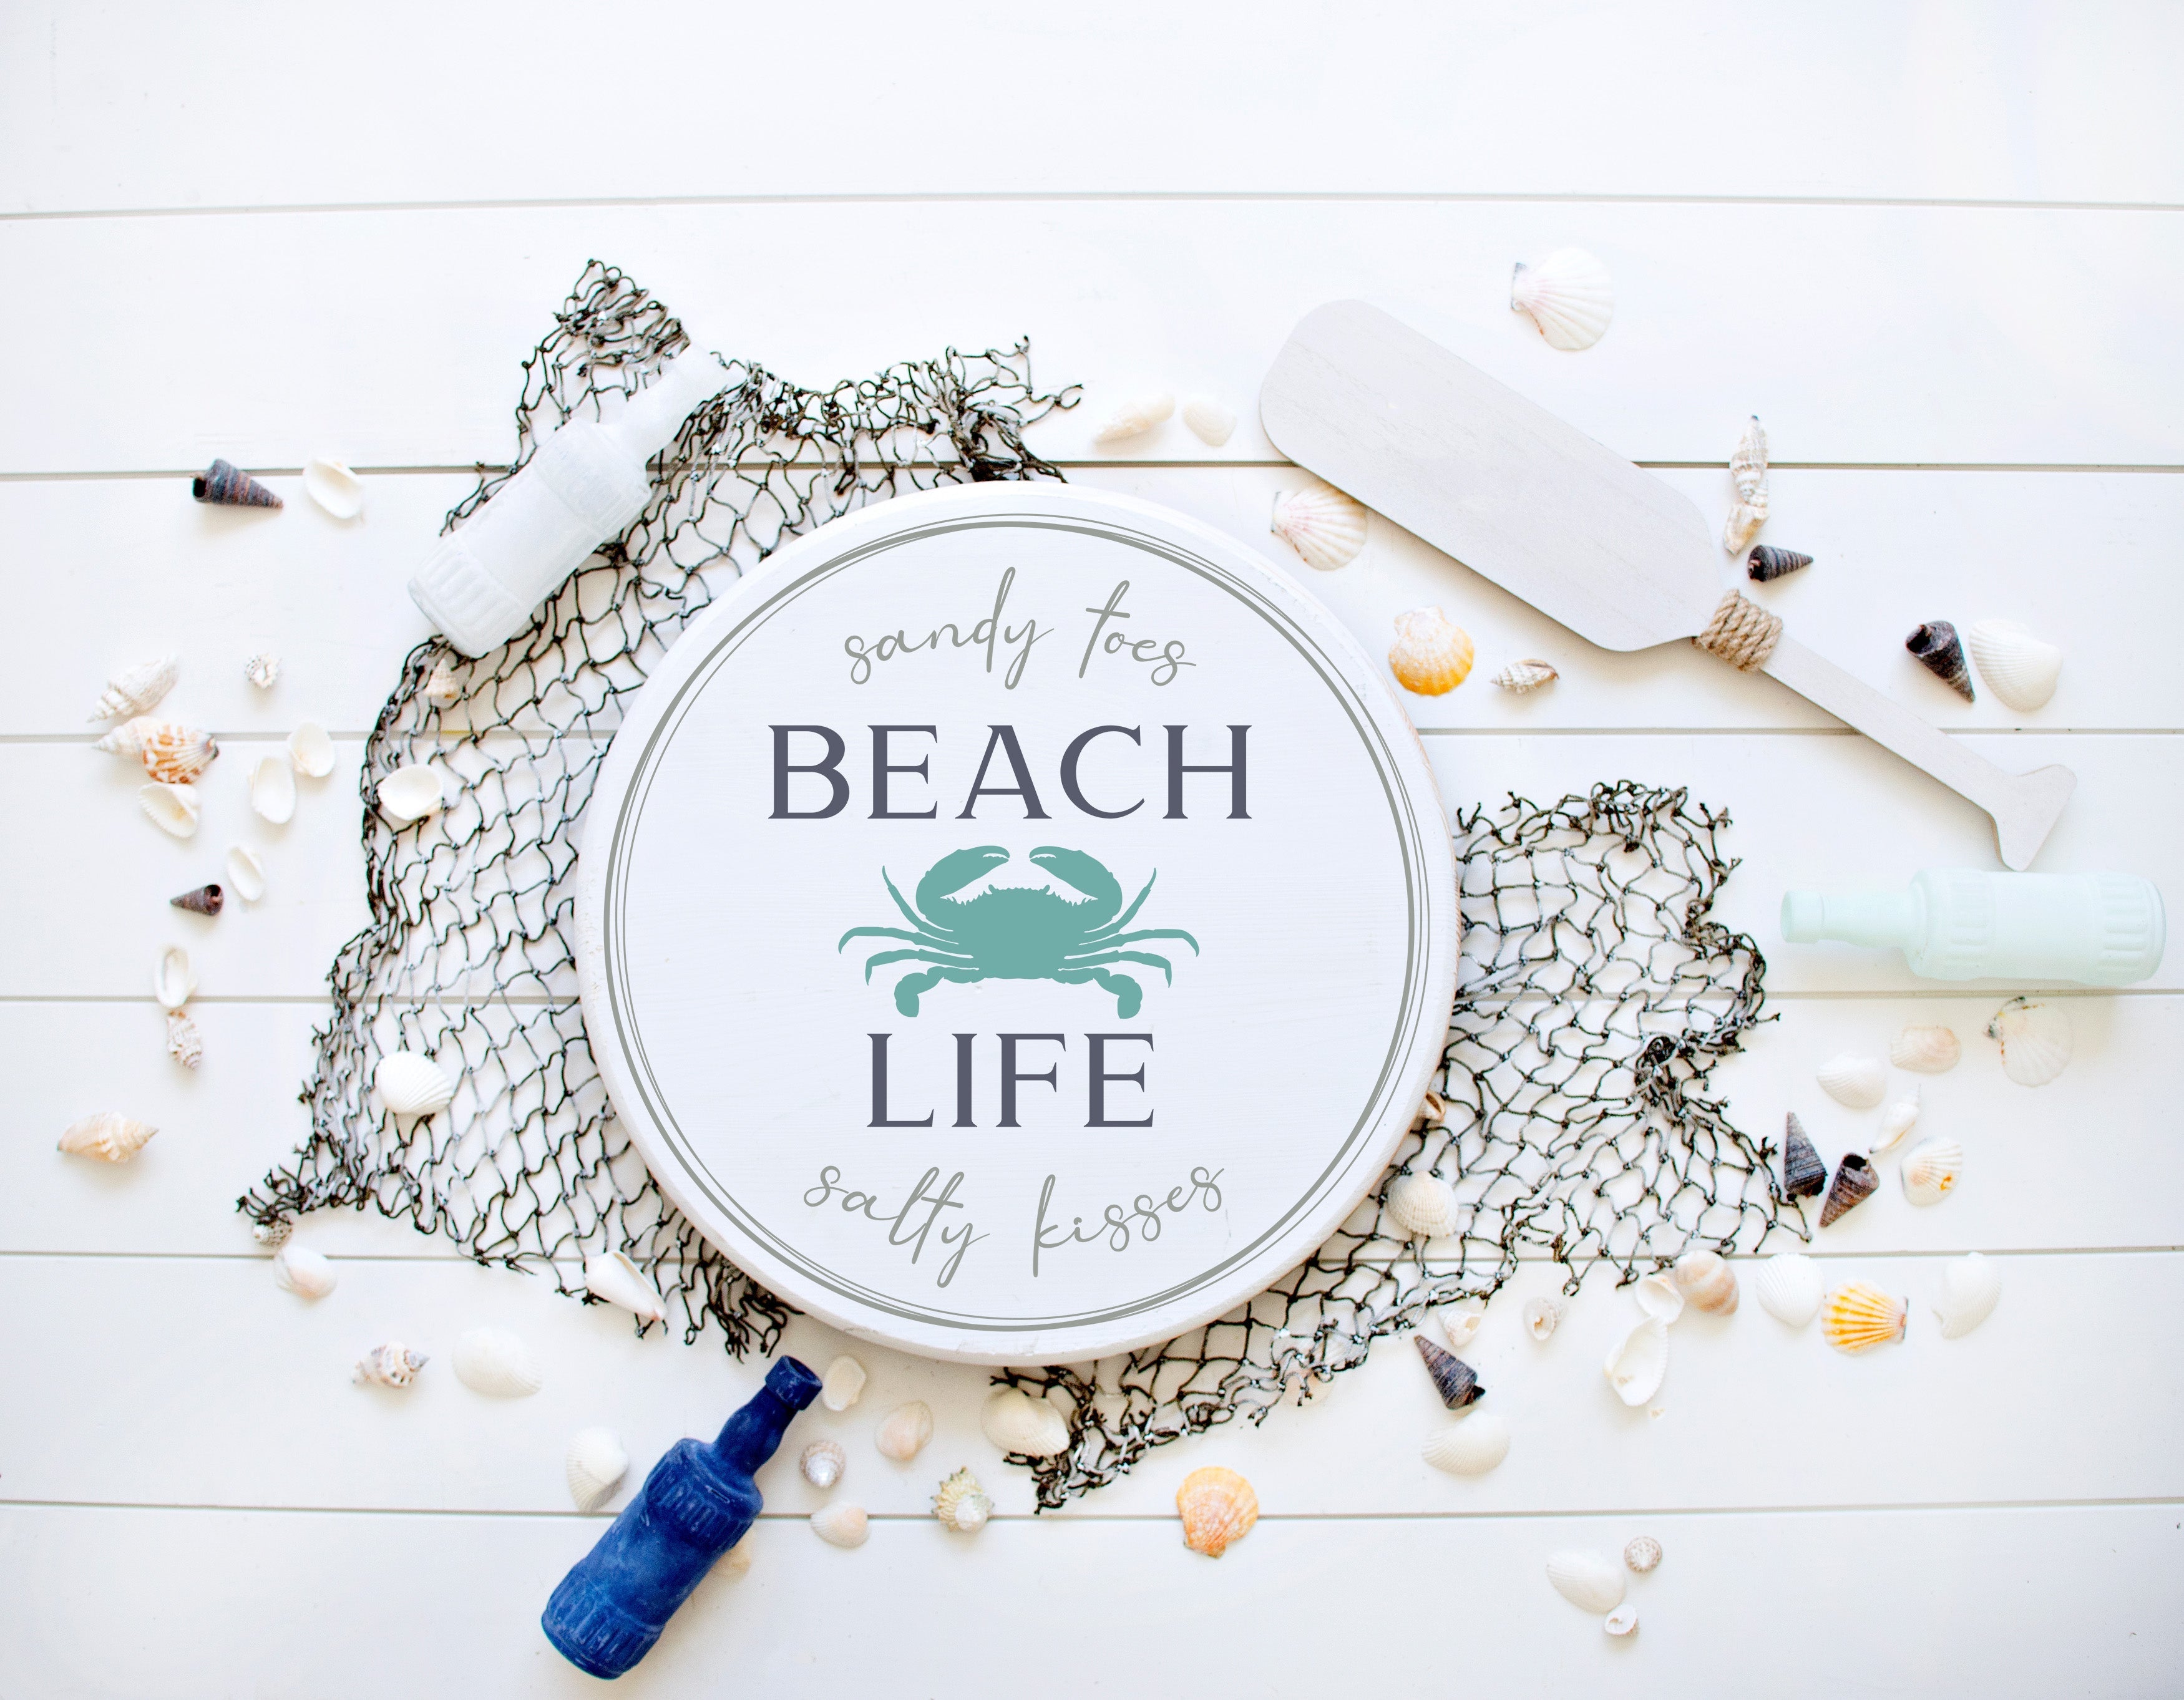 BEACHY ROUNDS WORKSHOPS